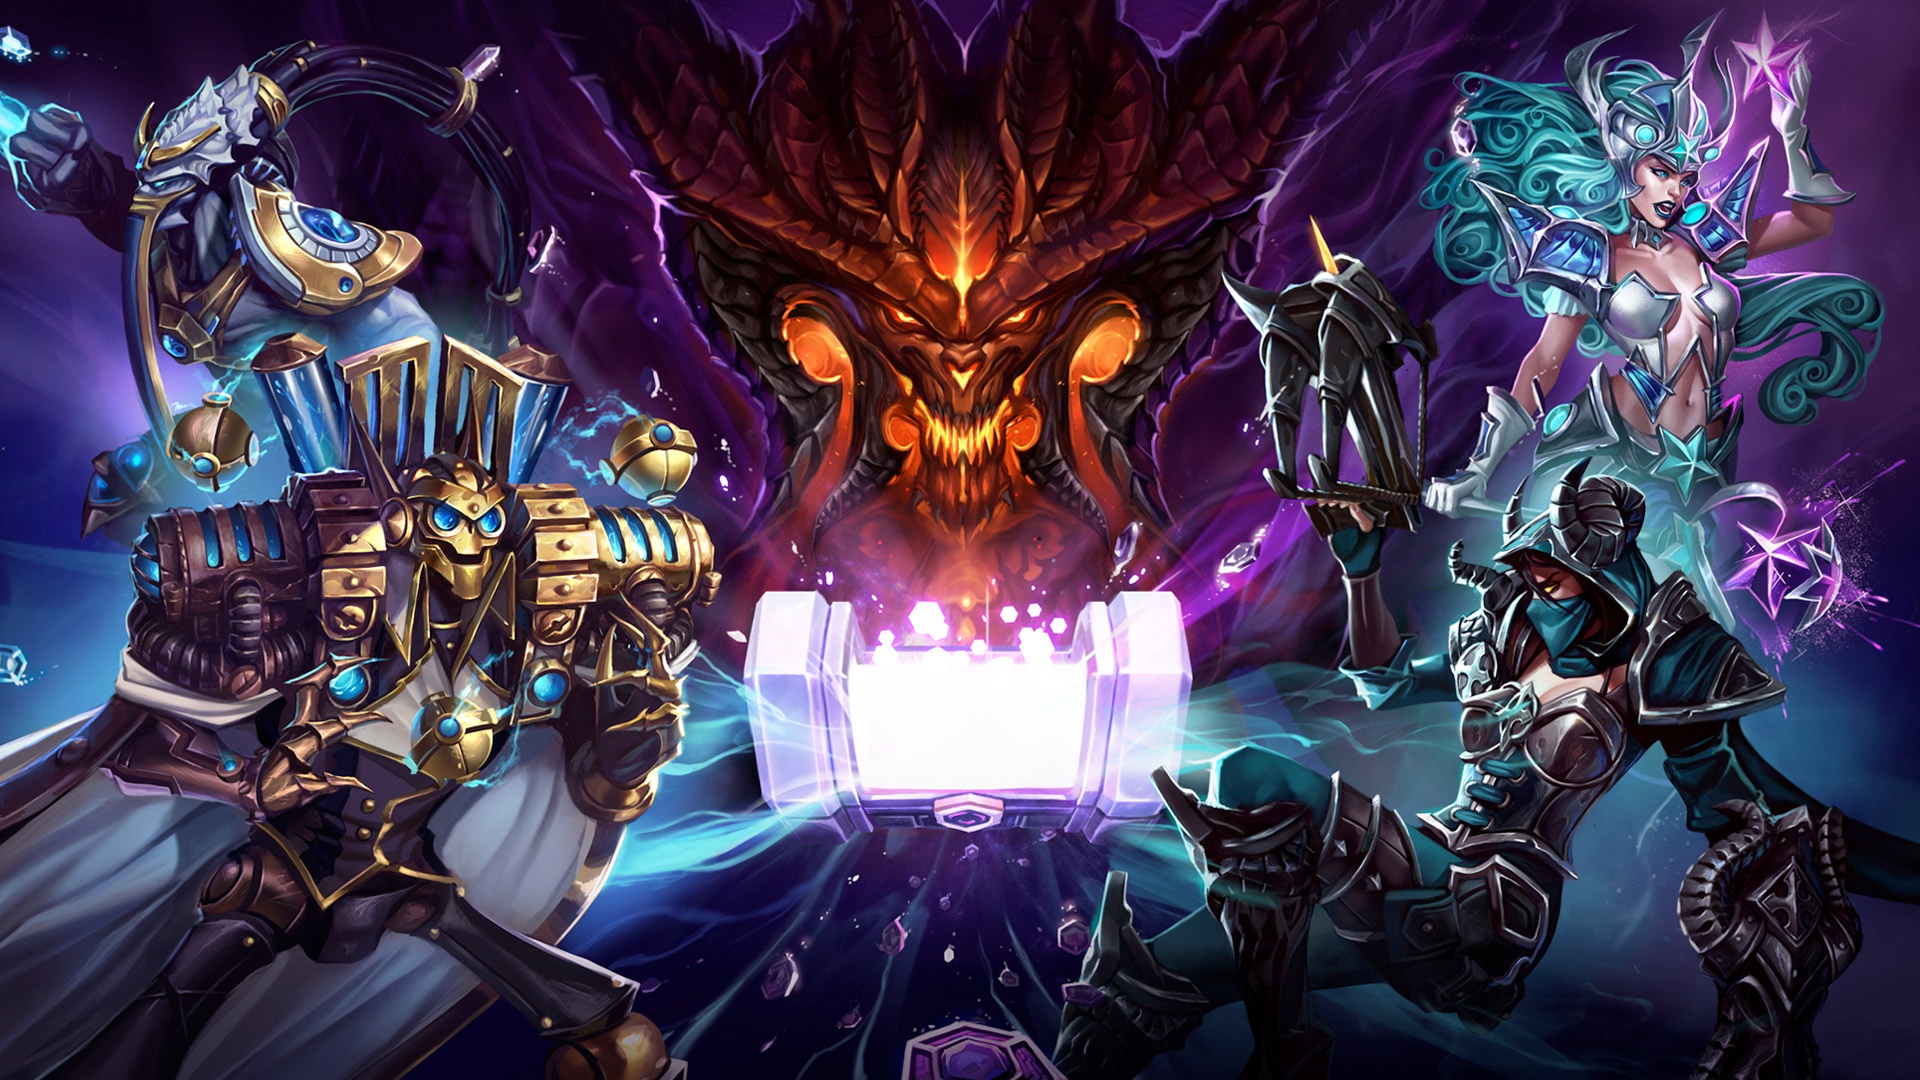 After seven years, Heroes of the Storm will receive no more updates